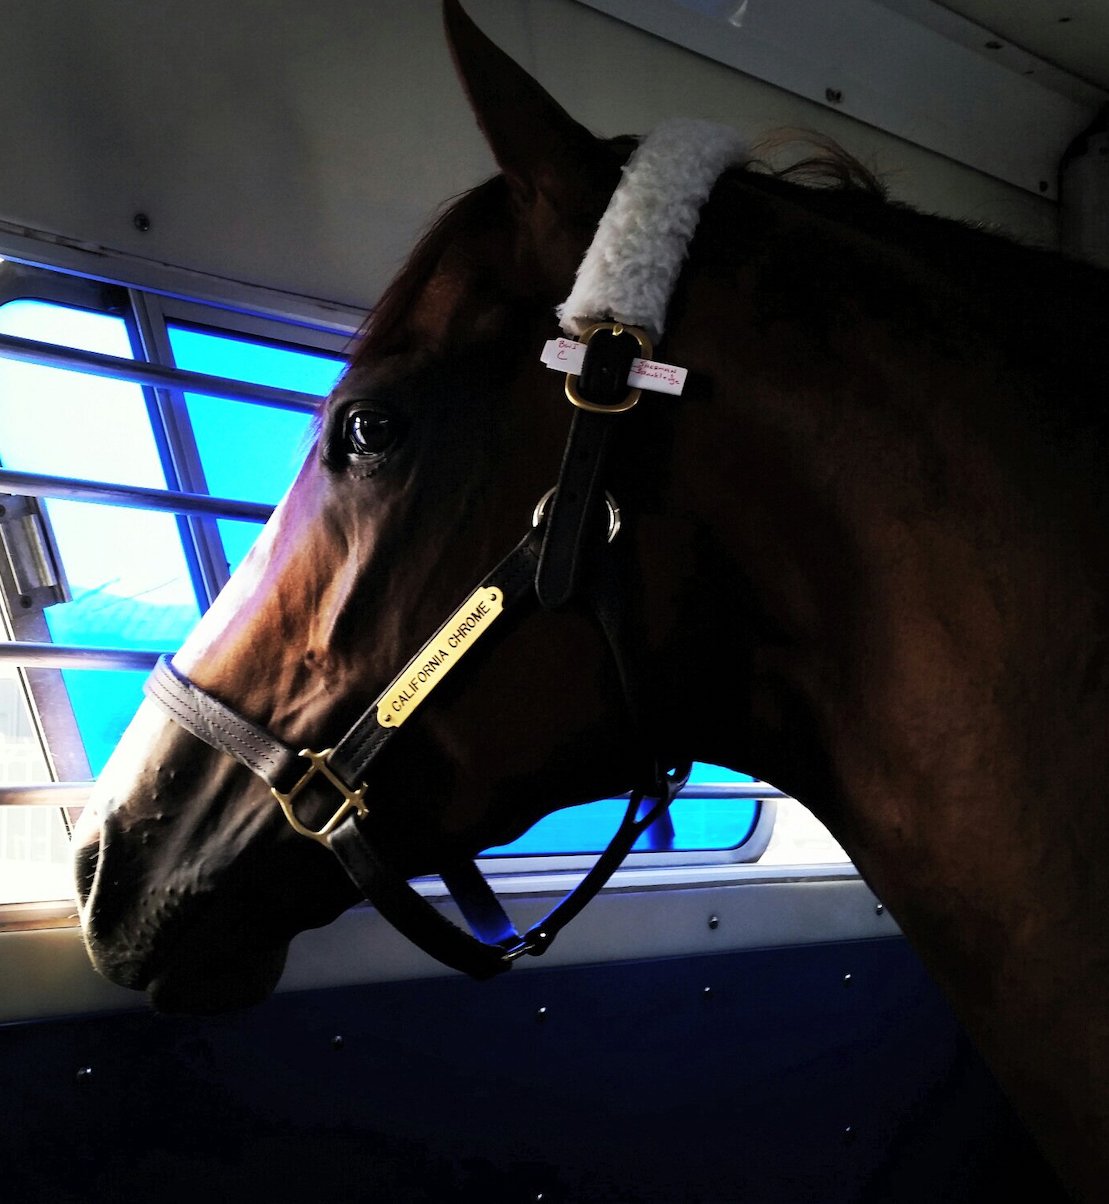 Celebrity guest: California Chrome looks out from his box stall en route from his California base. Photo: Summer Gotwals/Brook Ledge